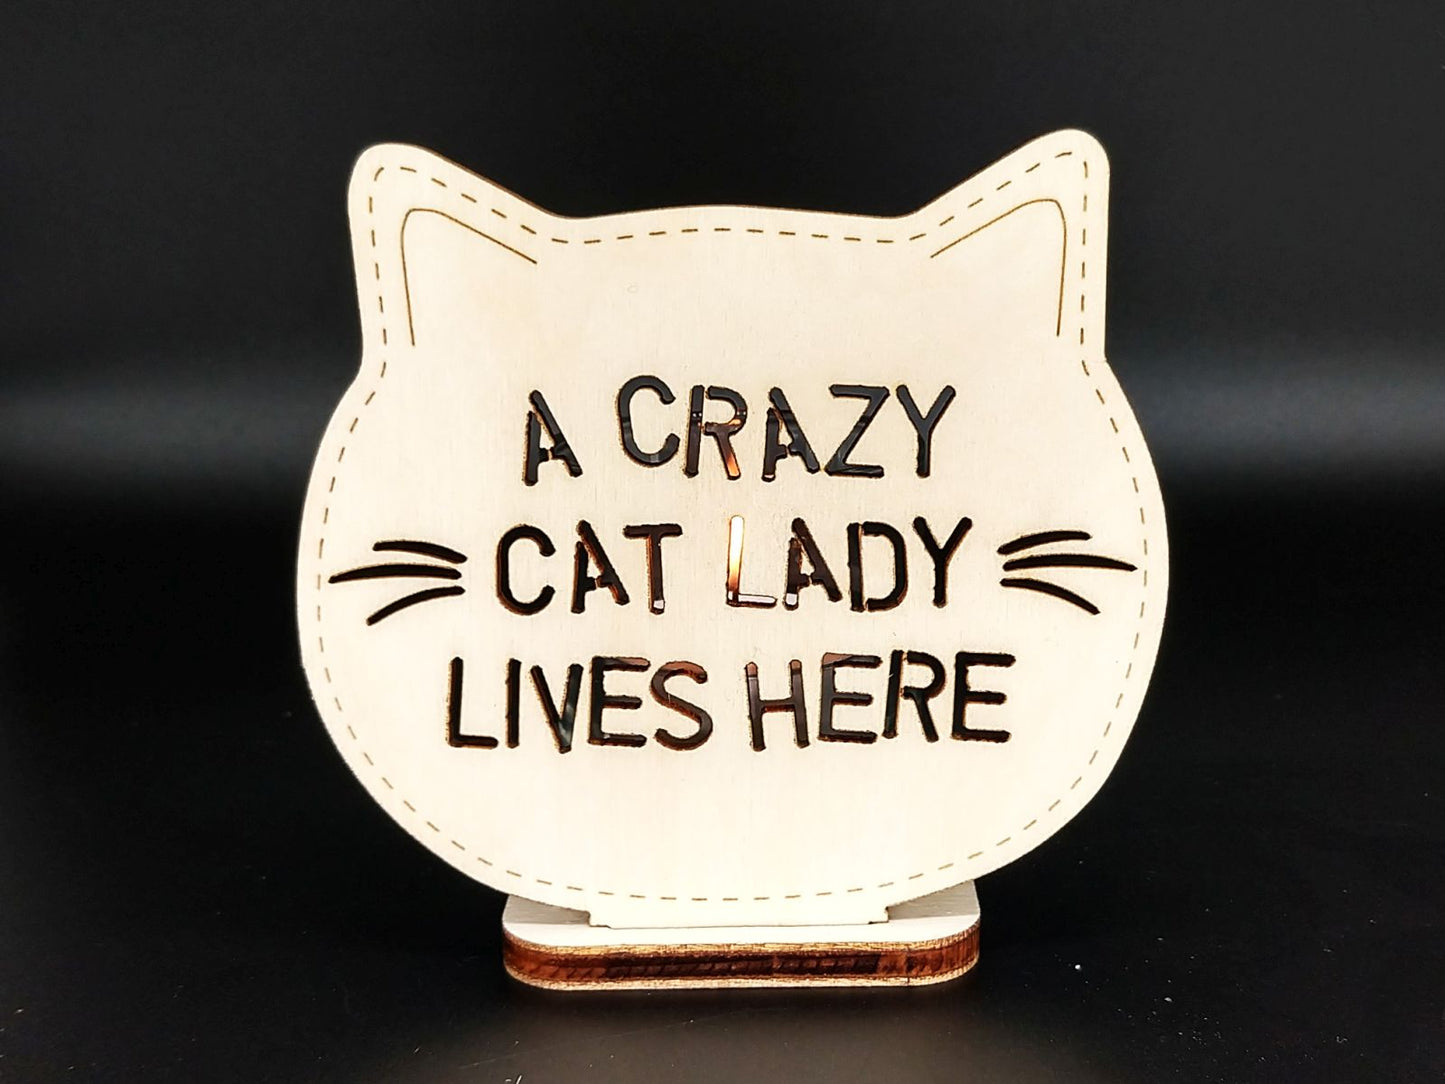 Waxinelichthouder met glaasje "A crazy cat lady lives here"